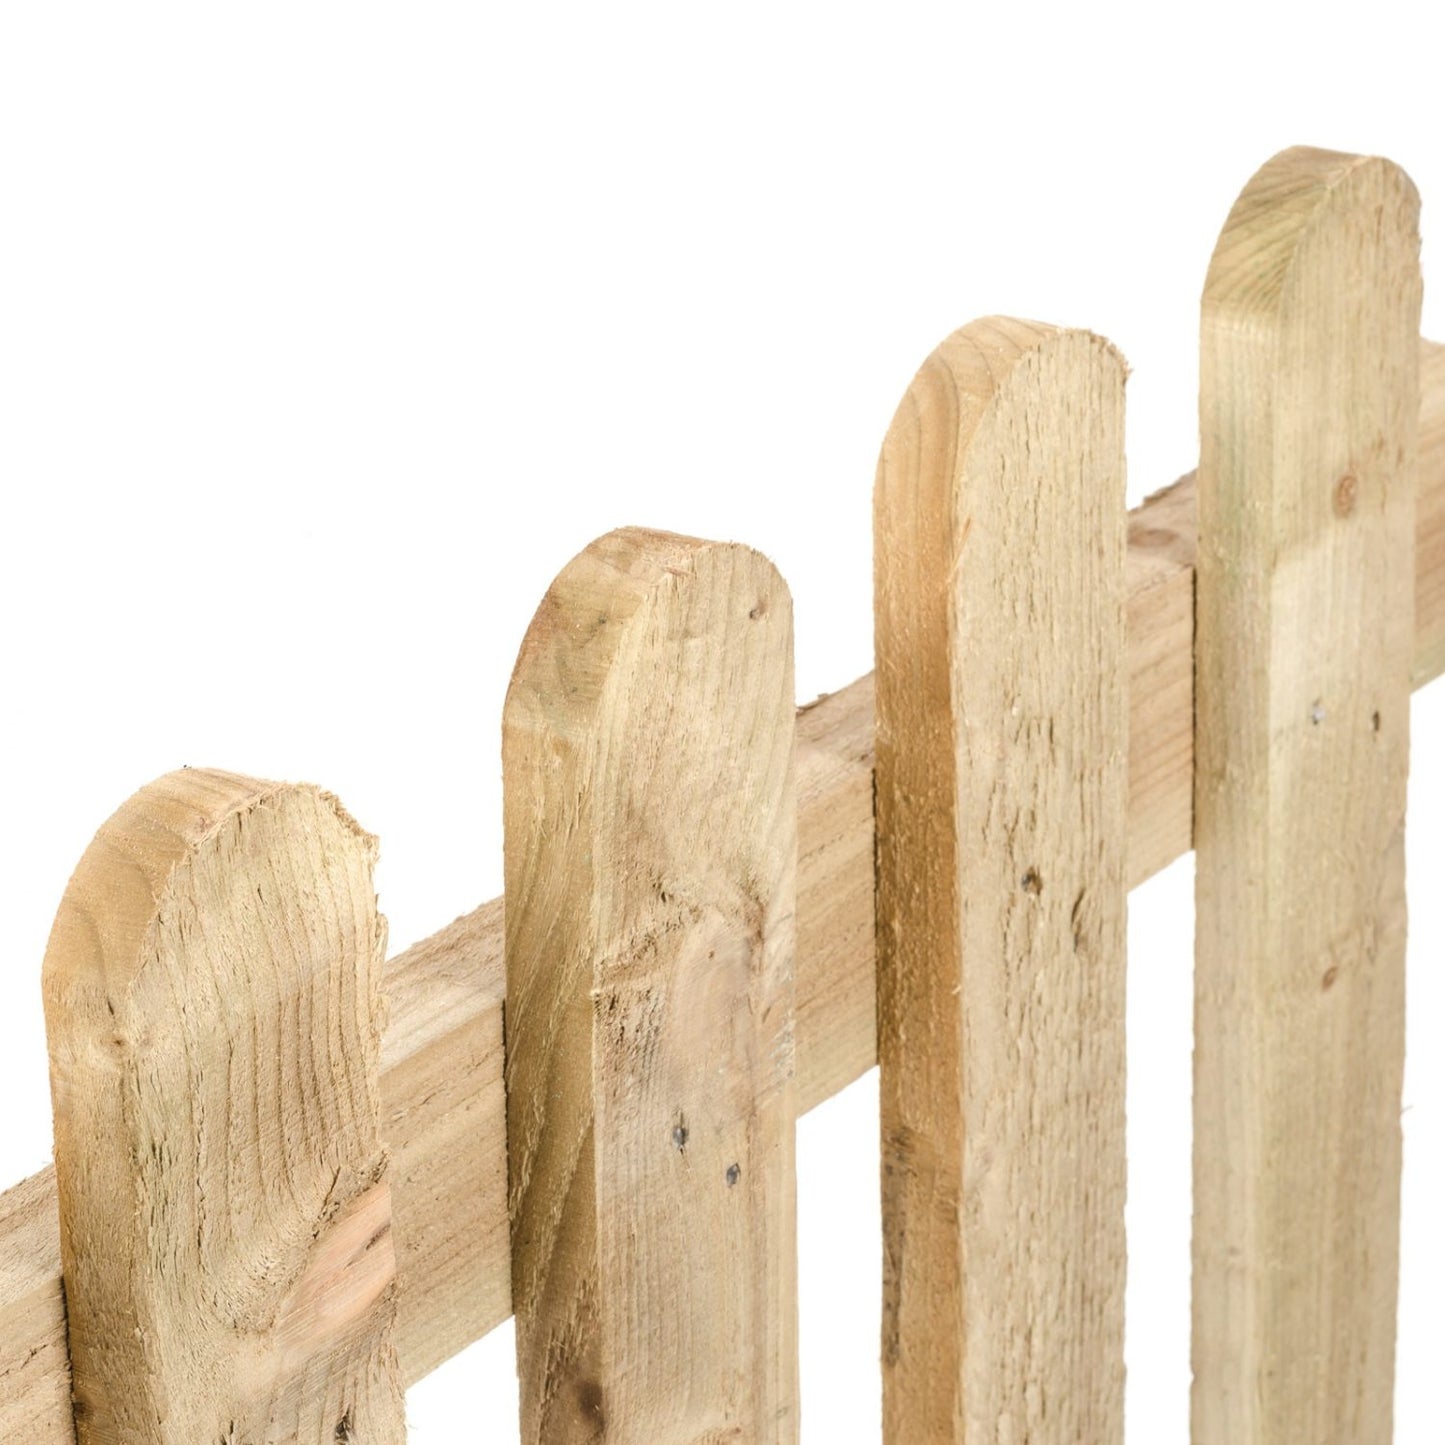 Picket fencing made to order any size. Available now